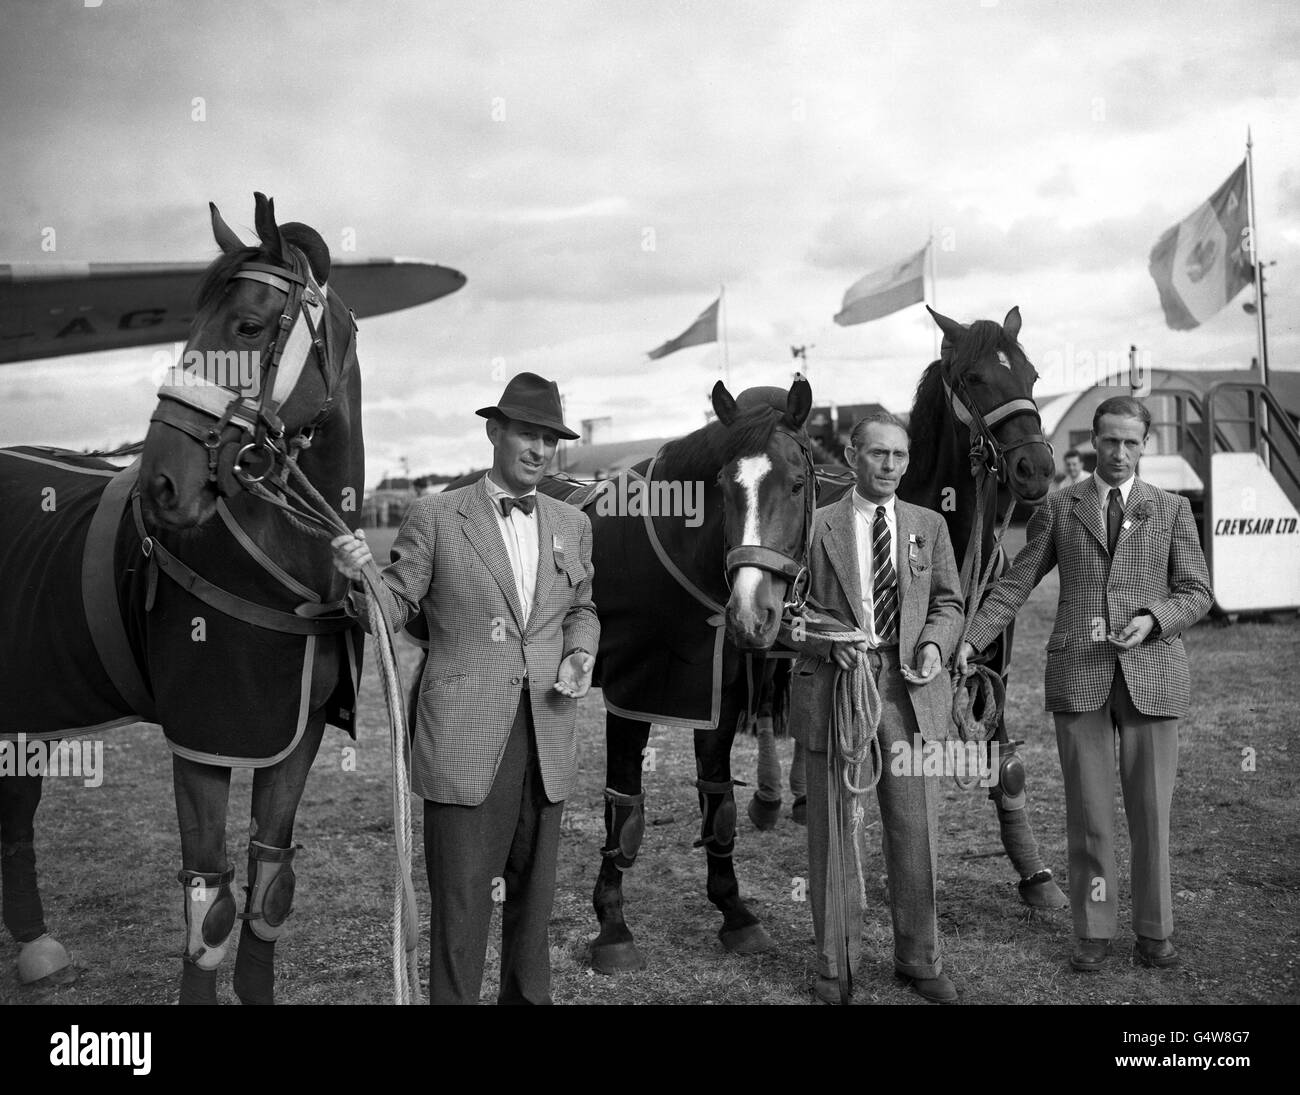 Britain's only Olympic Gold Medal winners arrive at Blackbushe Airport, Surrey from Helsinki. They were the three riders and their horses that jumped to success in the team section of the Prix des Nations. Left to right - Foxhunter and his rider Colonel Harry Llewellyn; Nizefella and his rider Wilf White; and Aherlow, with his rider Lt Colonel Douglas (Dougie) Stewart, on their arrival. Stock Photo